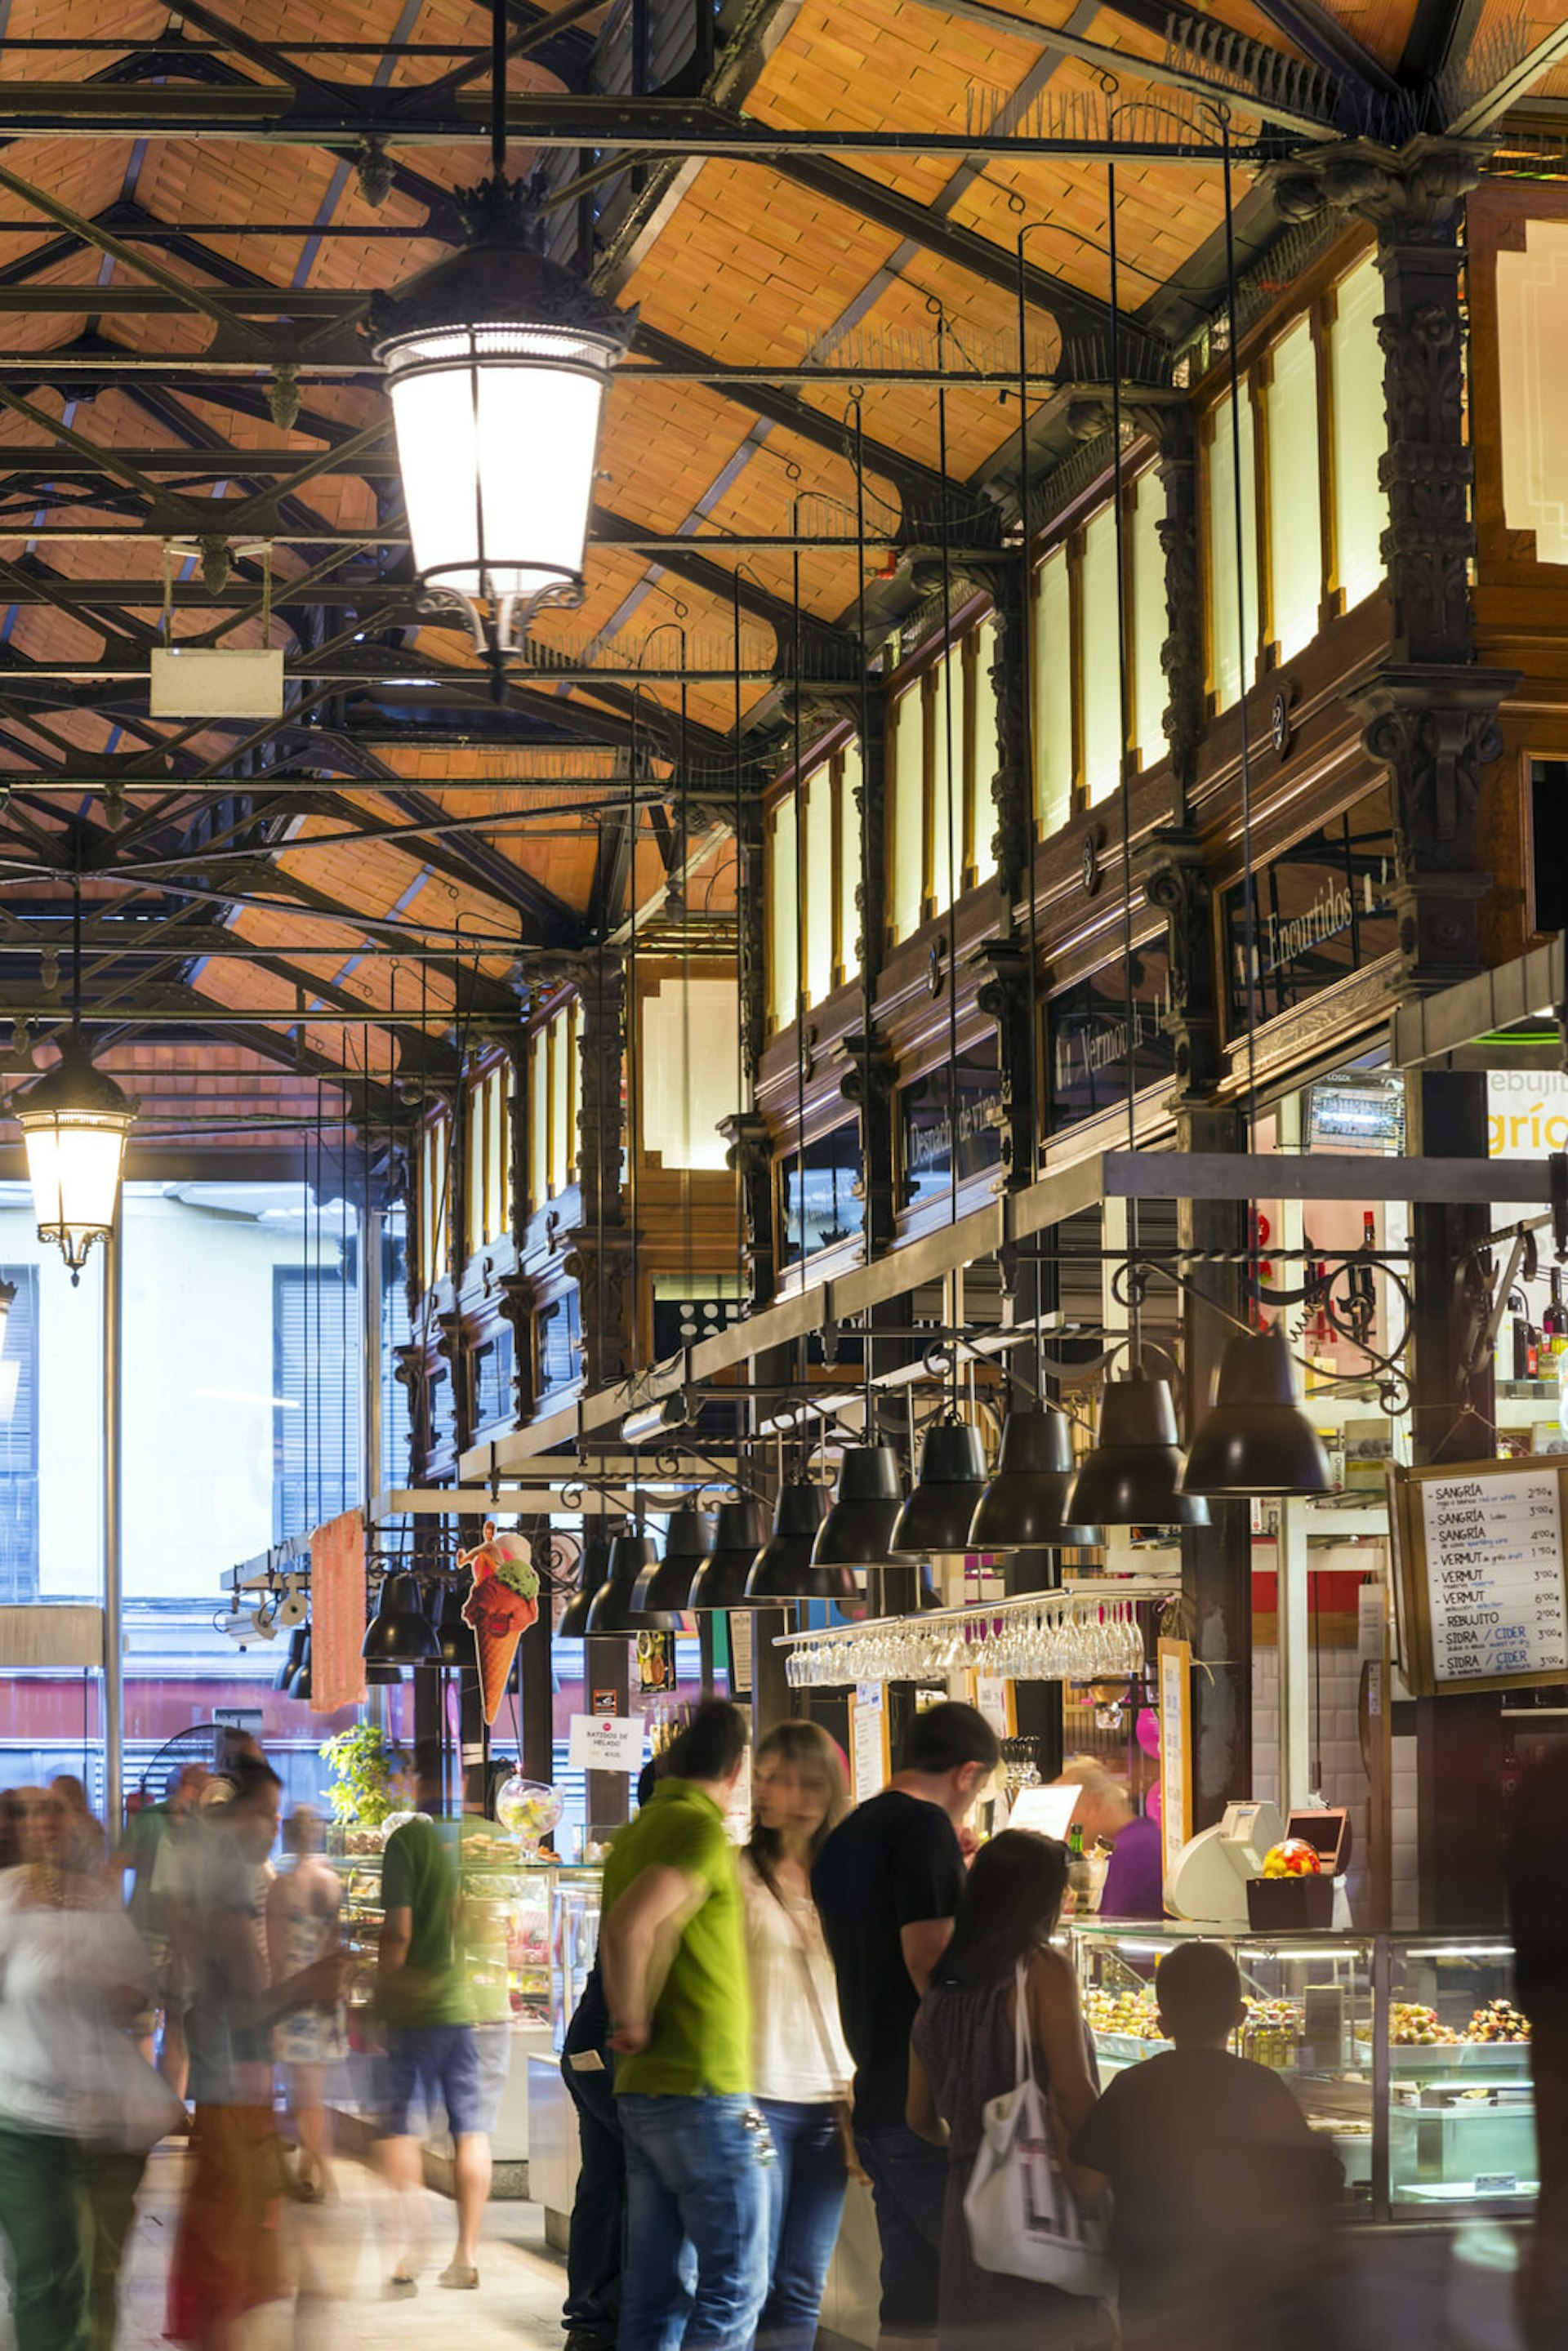 The hustle and bustle of Mercado San Miguel © Matteo Colombo / Getty Images